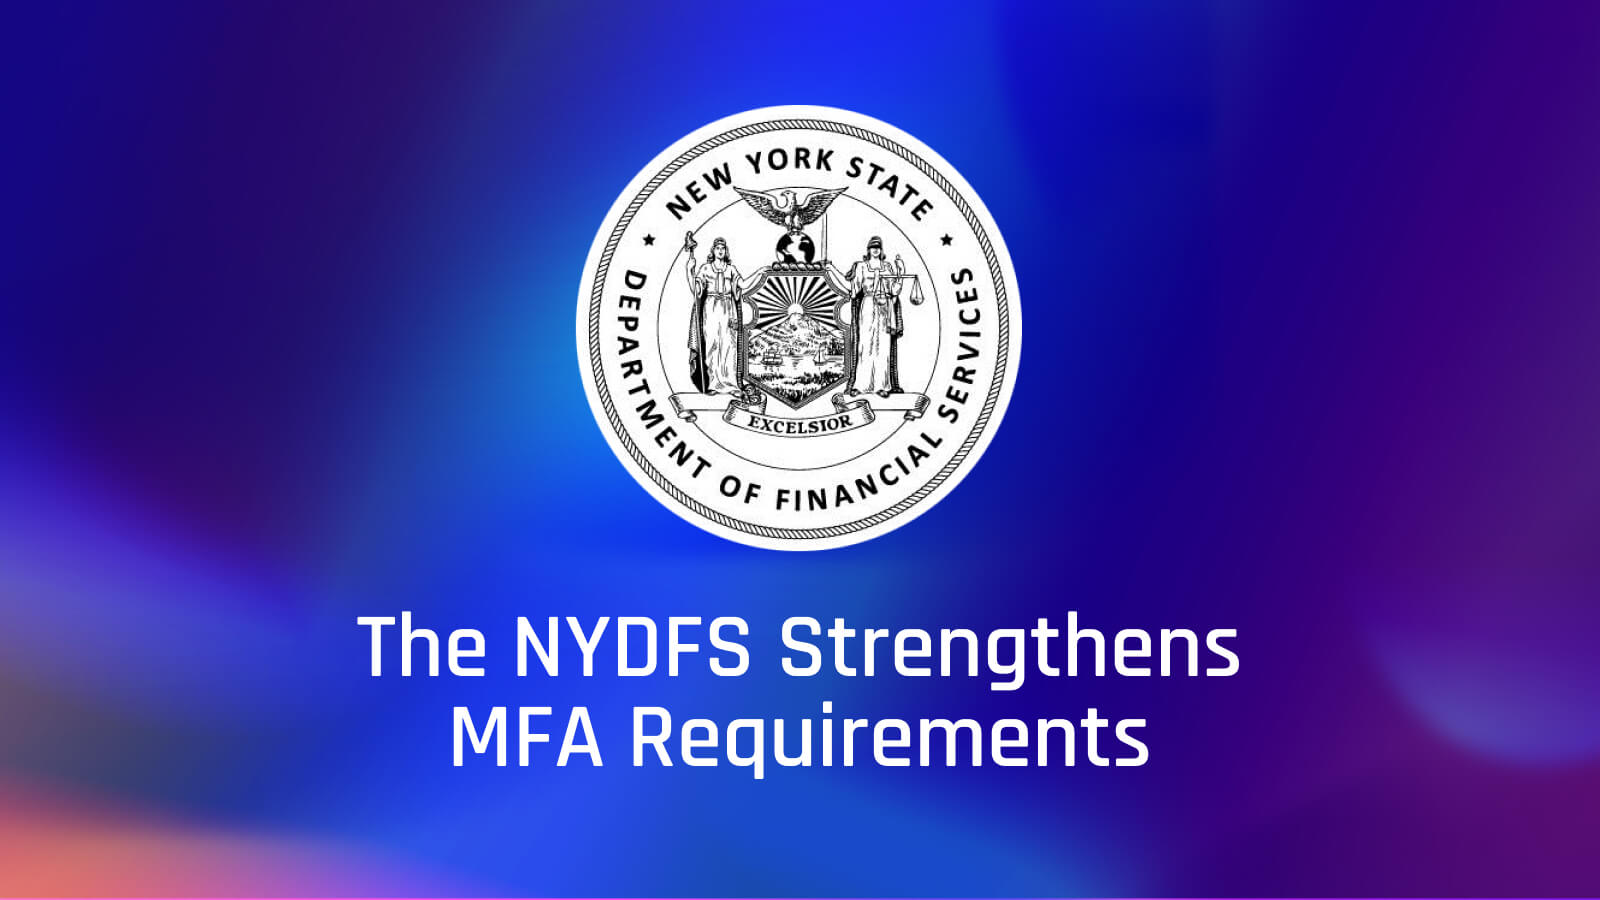 The NYDFS Multi-Factor Authentication Requirement: What You Need to Know